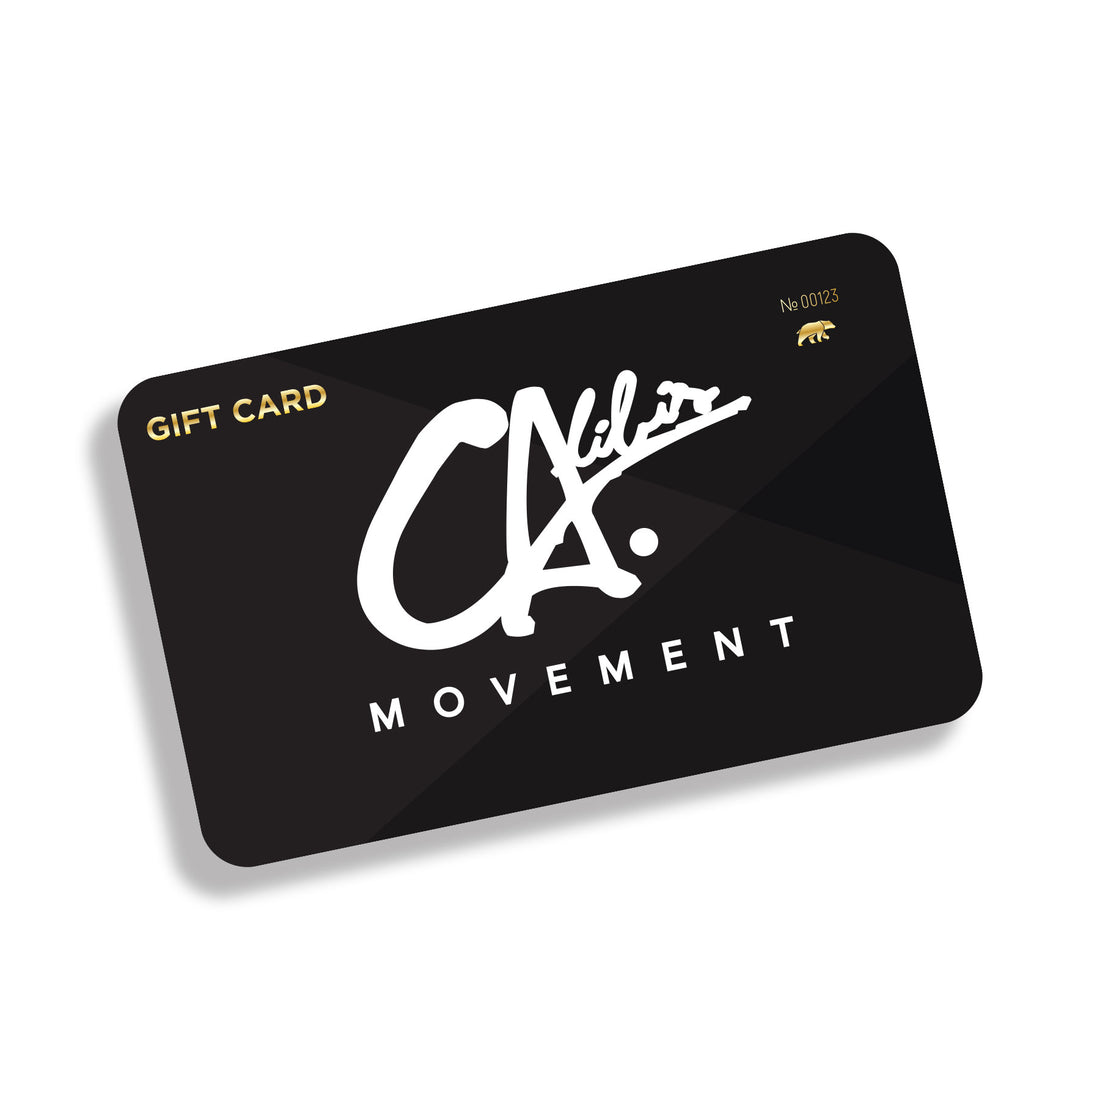 GIFT CARDS for Calibis Clothing